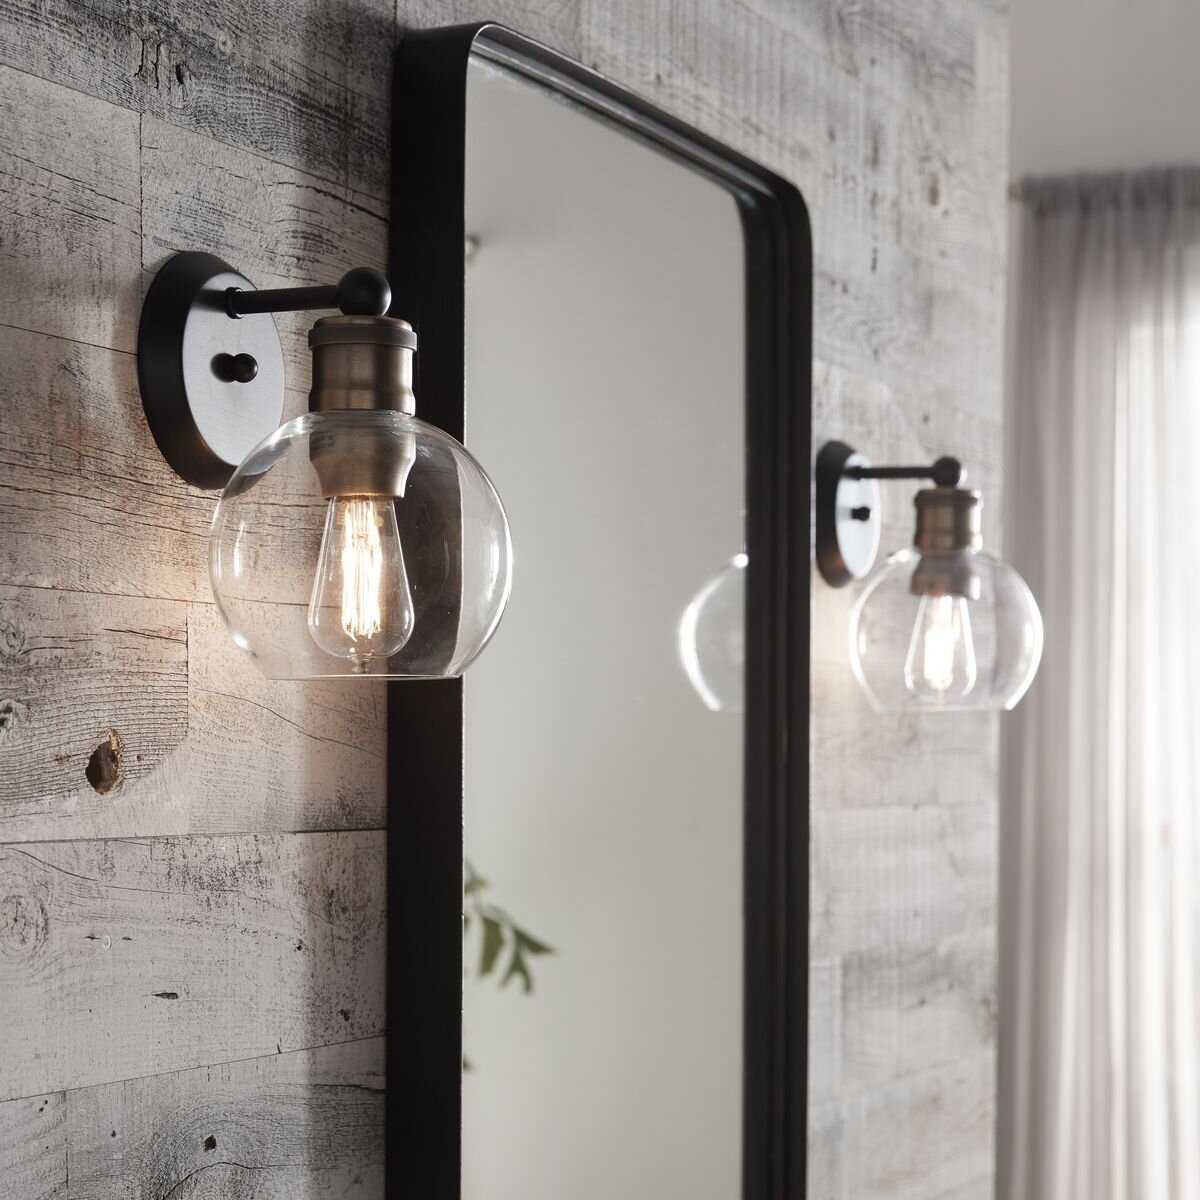 Put a Wall Sconce on Both Sides of Your Mirror